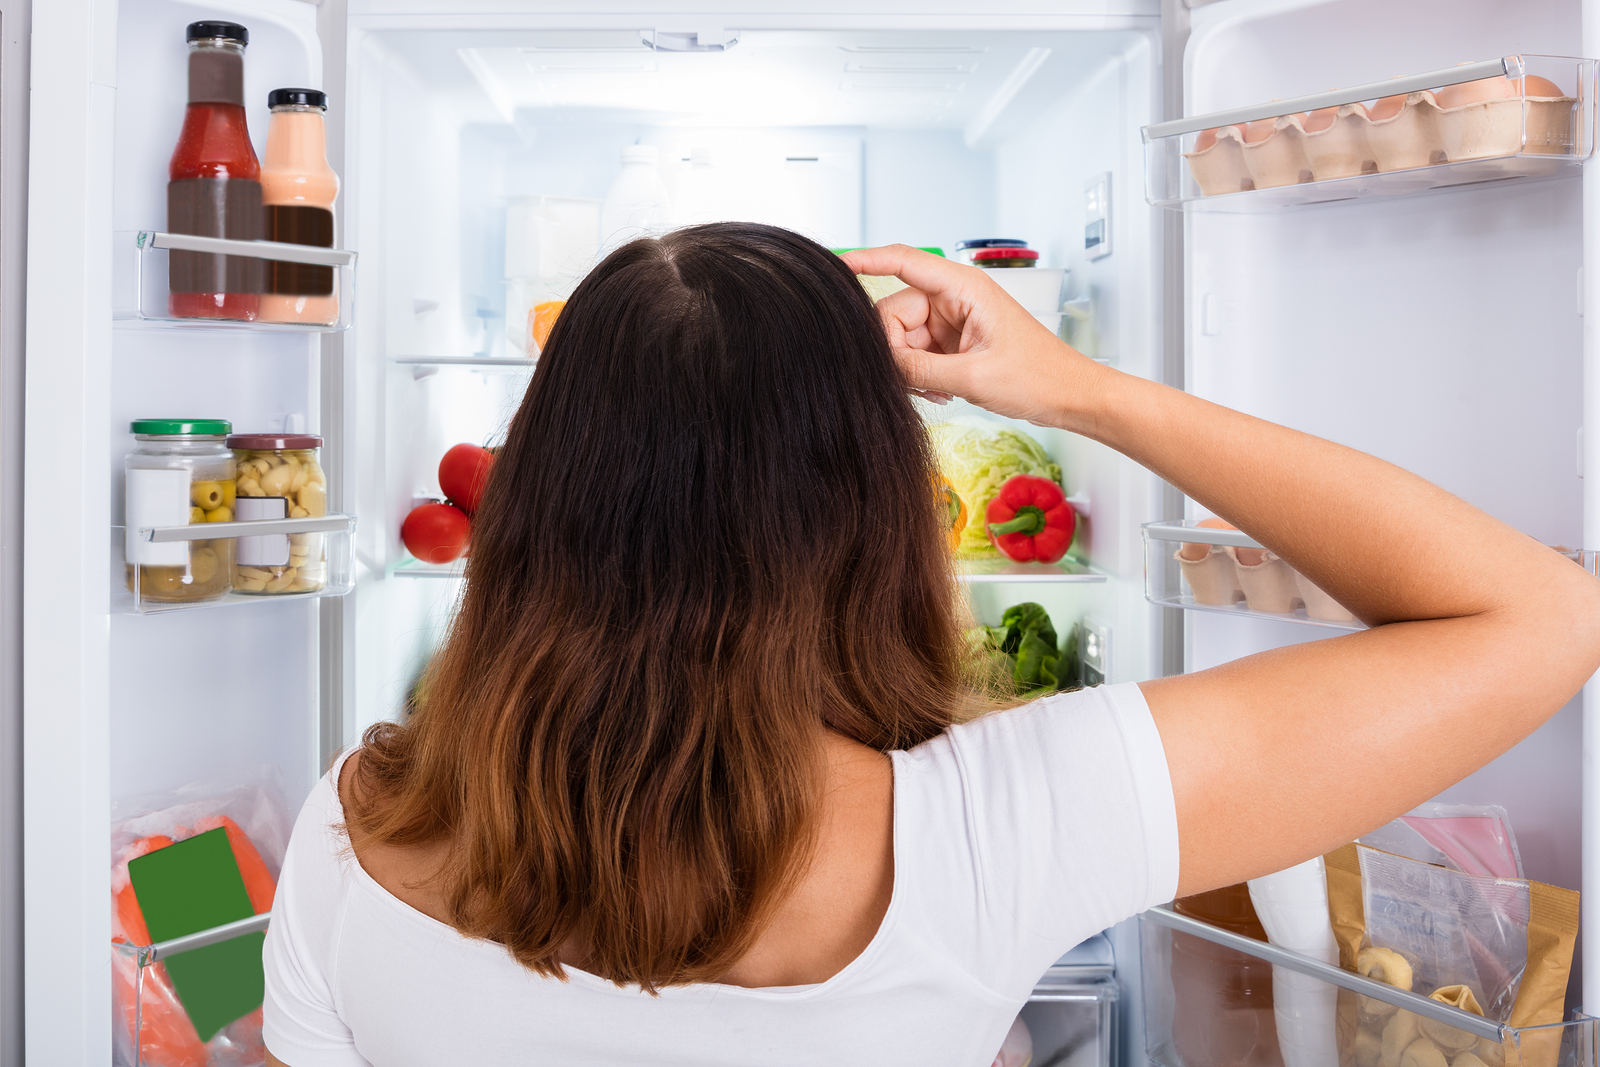 Rear View Of Confused Woman Searching For Food In The Fridge